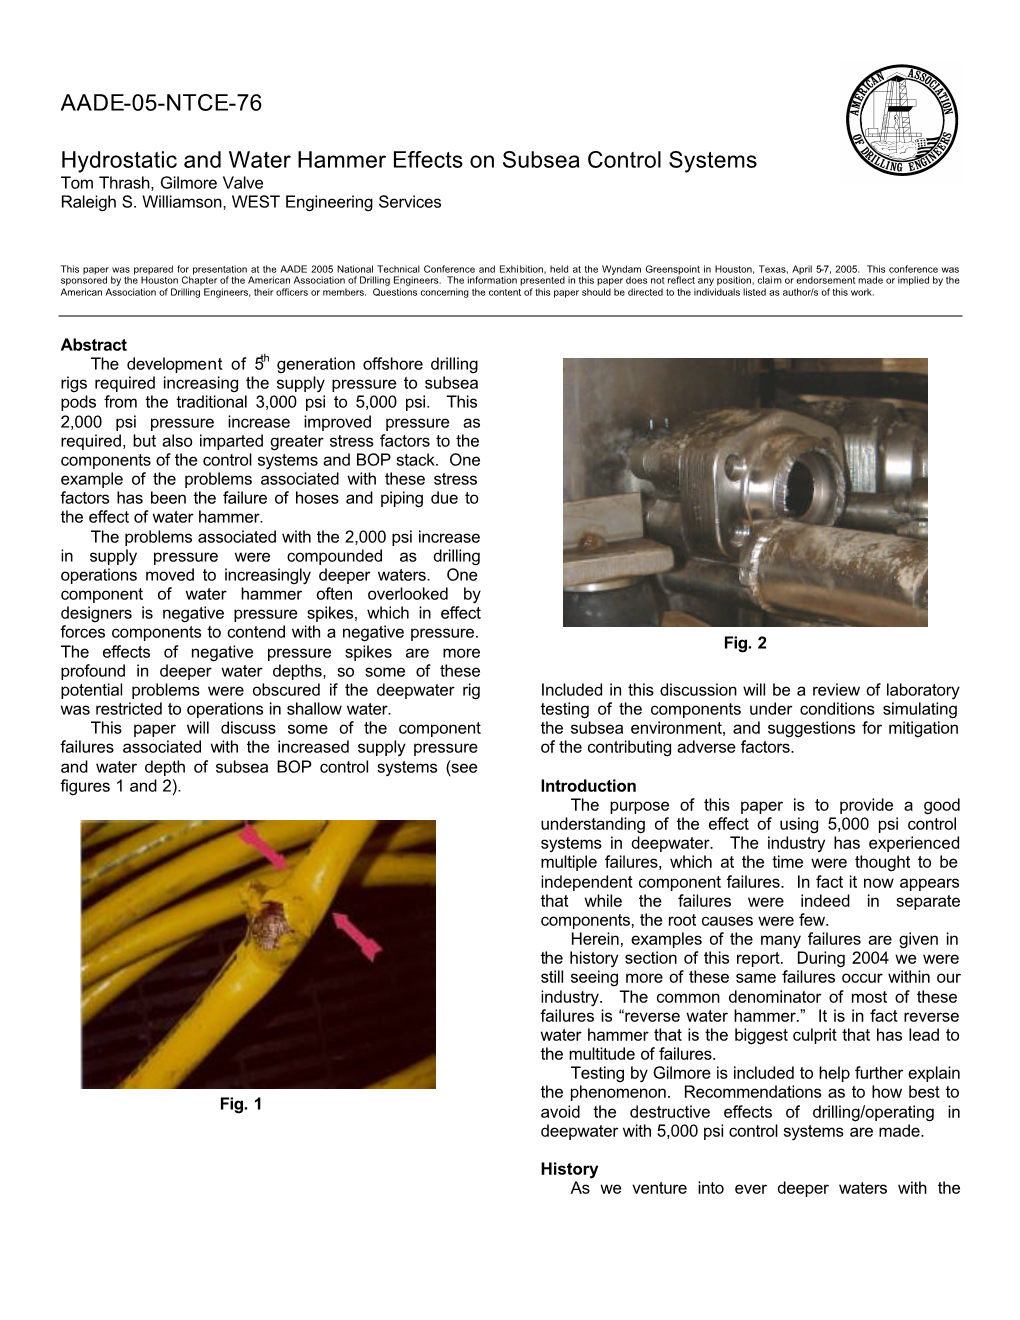 Hydrostatic and Water Hammer Effects on Subsea Control Systems Tom Thrash, Gilmore Valve Raleigh S